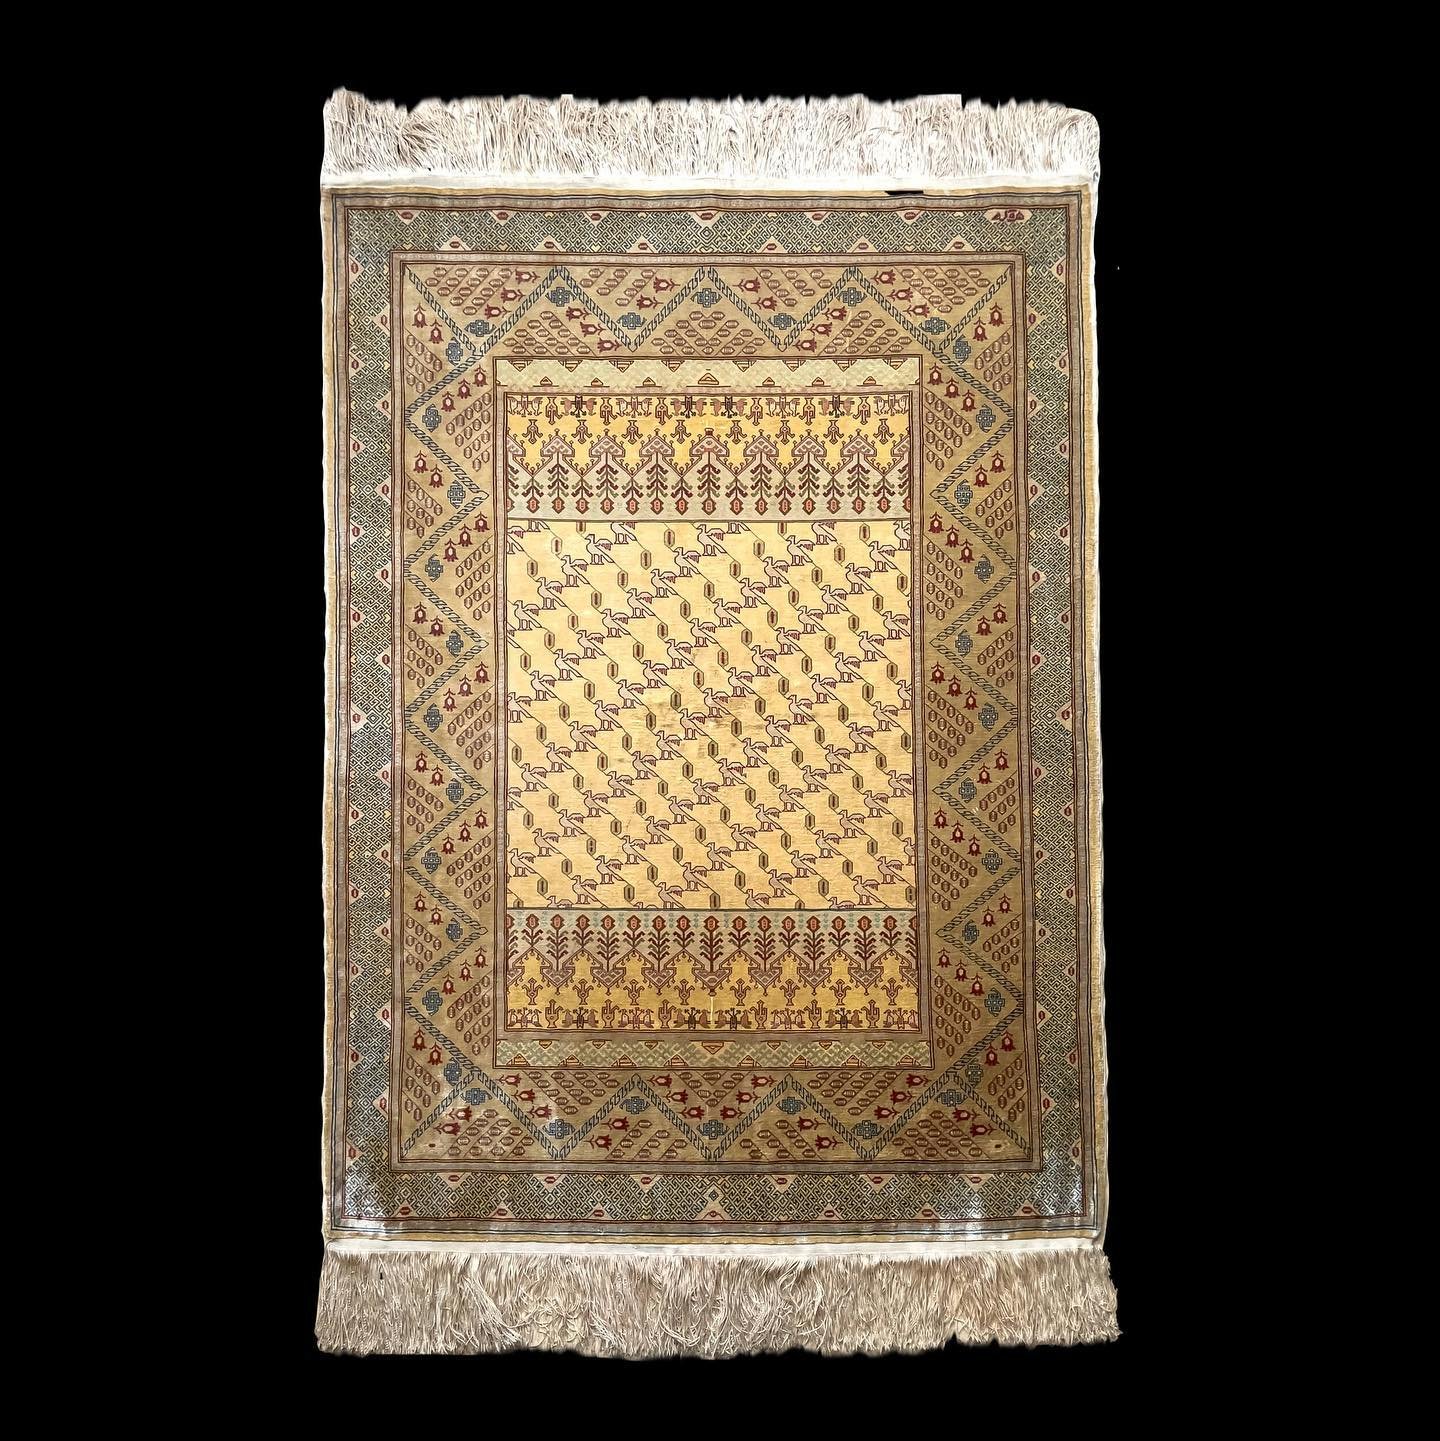 This stunning antique silk Hereke rug has just landed in our shop. Its fine weave and unique design combining both geometric and nature inspired patterns make it a rare piece that will elevate any space.

Circa 1950-60s
Pure Silk
Handmade
Persian

.
